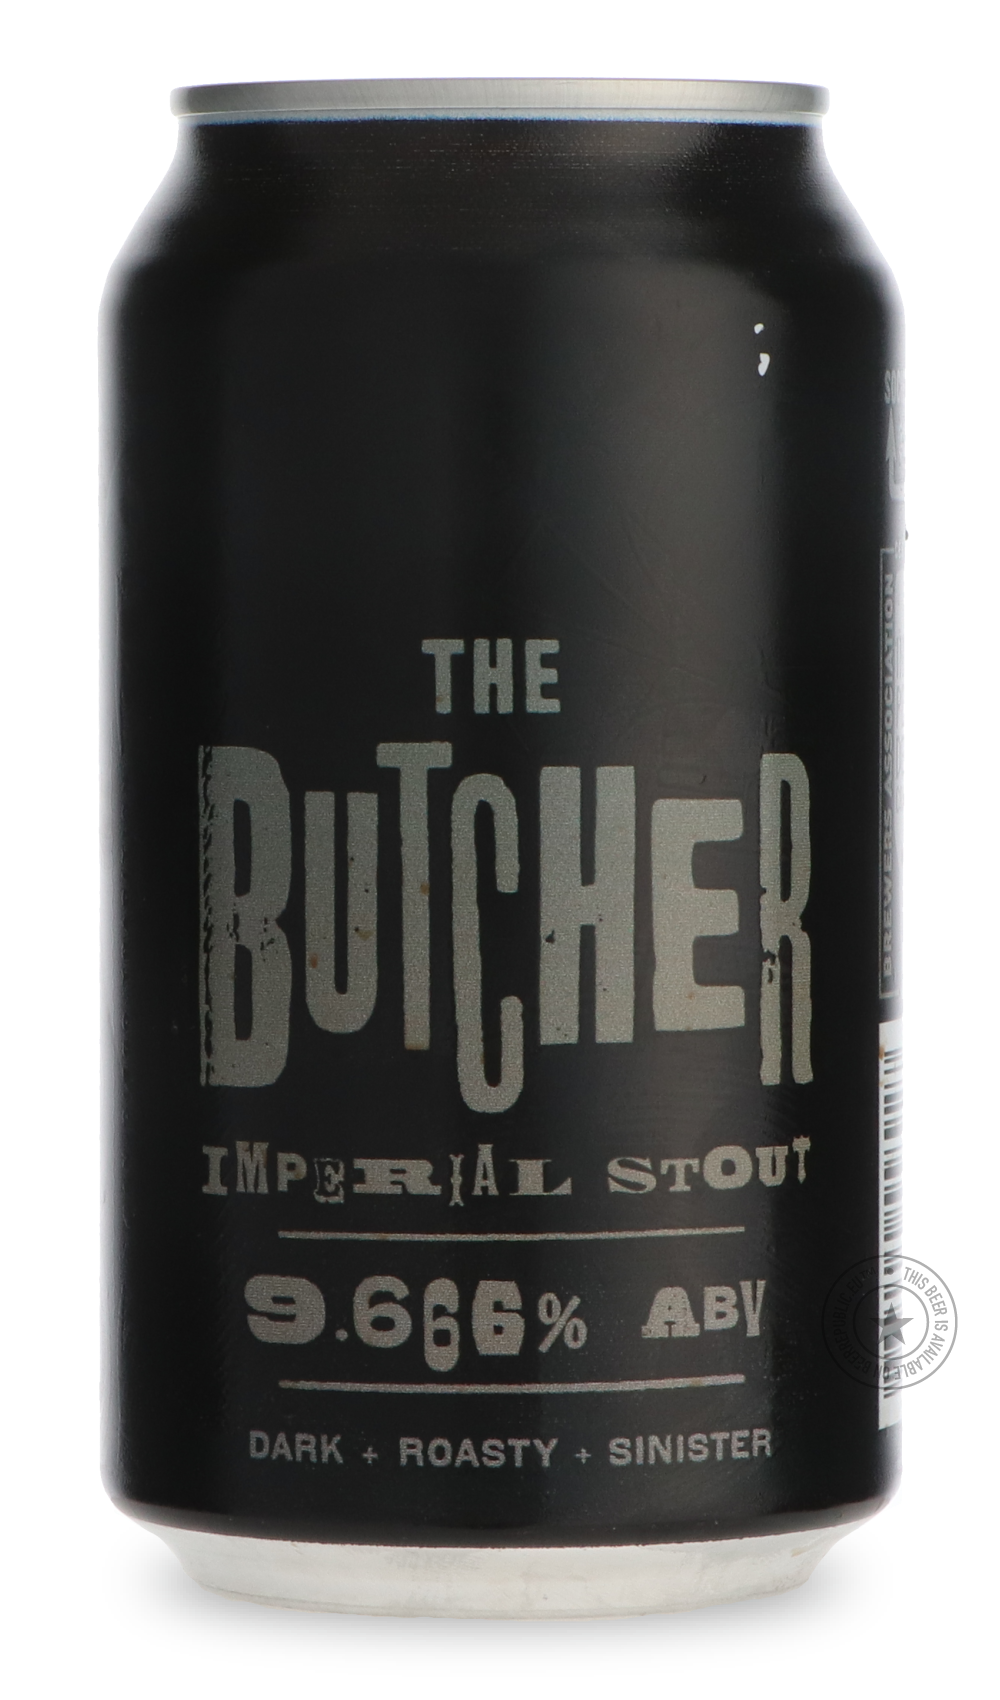 -Societe- The Butcher-Stout & Porter- Only @ Beer Republic - The best online beer store for American & Canadian craft beer - Buy beer online from the USA and Canada - Bier online kopen - Amerikaans bier kopen - Craft beer store - Craft beer kopen - Amerikanisch bier kaufen - Bier online kaufen - Acheter biere online - IPA - Stout - Porter - New England IPA - Hazy IPA - Imperial Stout - Barrel Aged - Barrel Aged Imperial Stout - Brown - Dark beer - Blond - Blonde - Pilsner - Lager - Wheat - Weizen - Amber - 